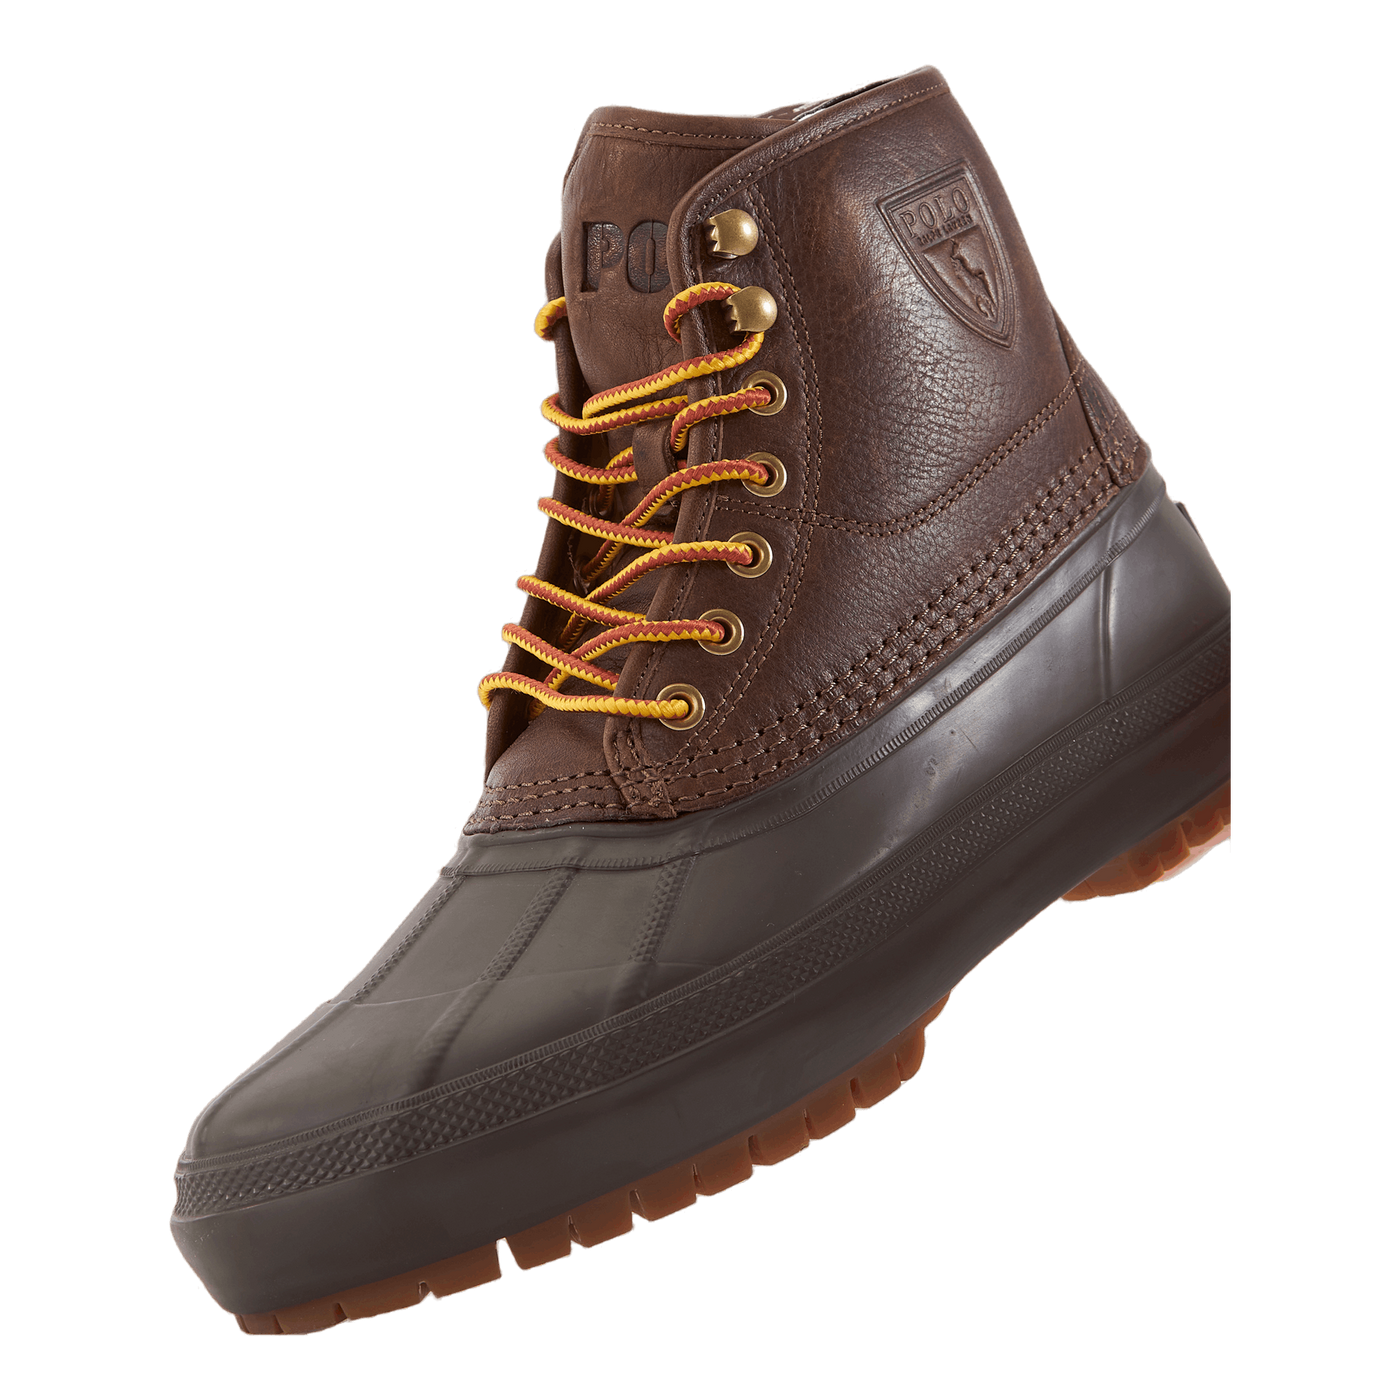 Claus Tumbled Leather Boot Chocolate Brown /Dk Brown